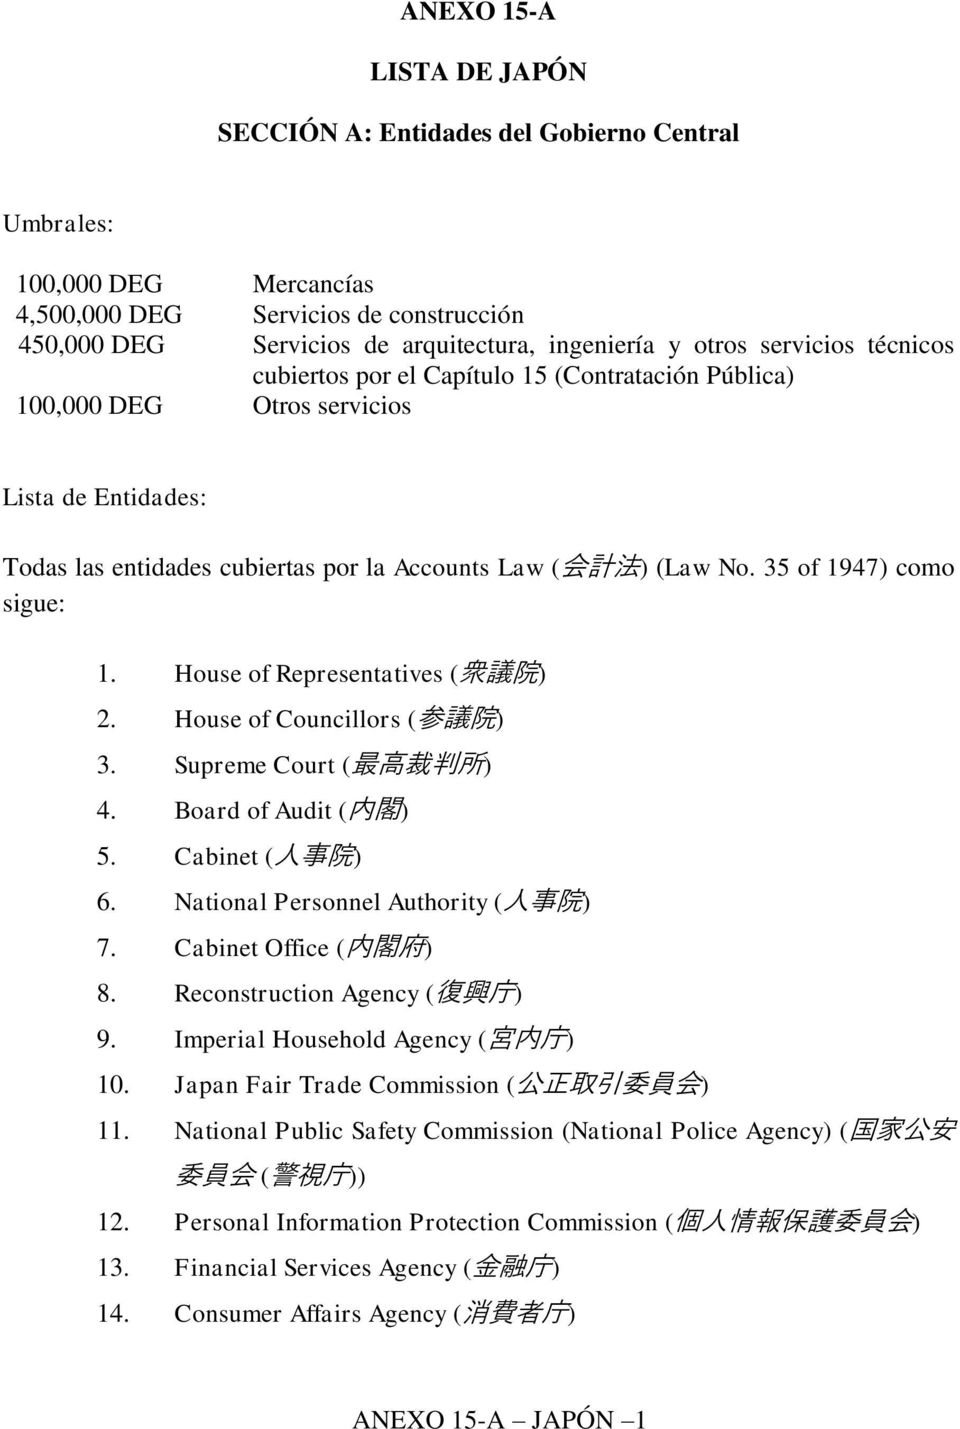 35 of 1947) como sigue: 1. House of Representatives ( 衆 議 院 ) 2. House of Councillors ( 参 議 院 ) 3. Supreme Court ( 最 高 裁 判 所 ) 4. Board of Audit ( 内 閣 ) 5. Cabinet ( 人 事 院 ) 6.